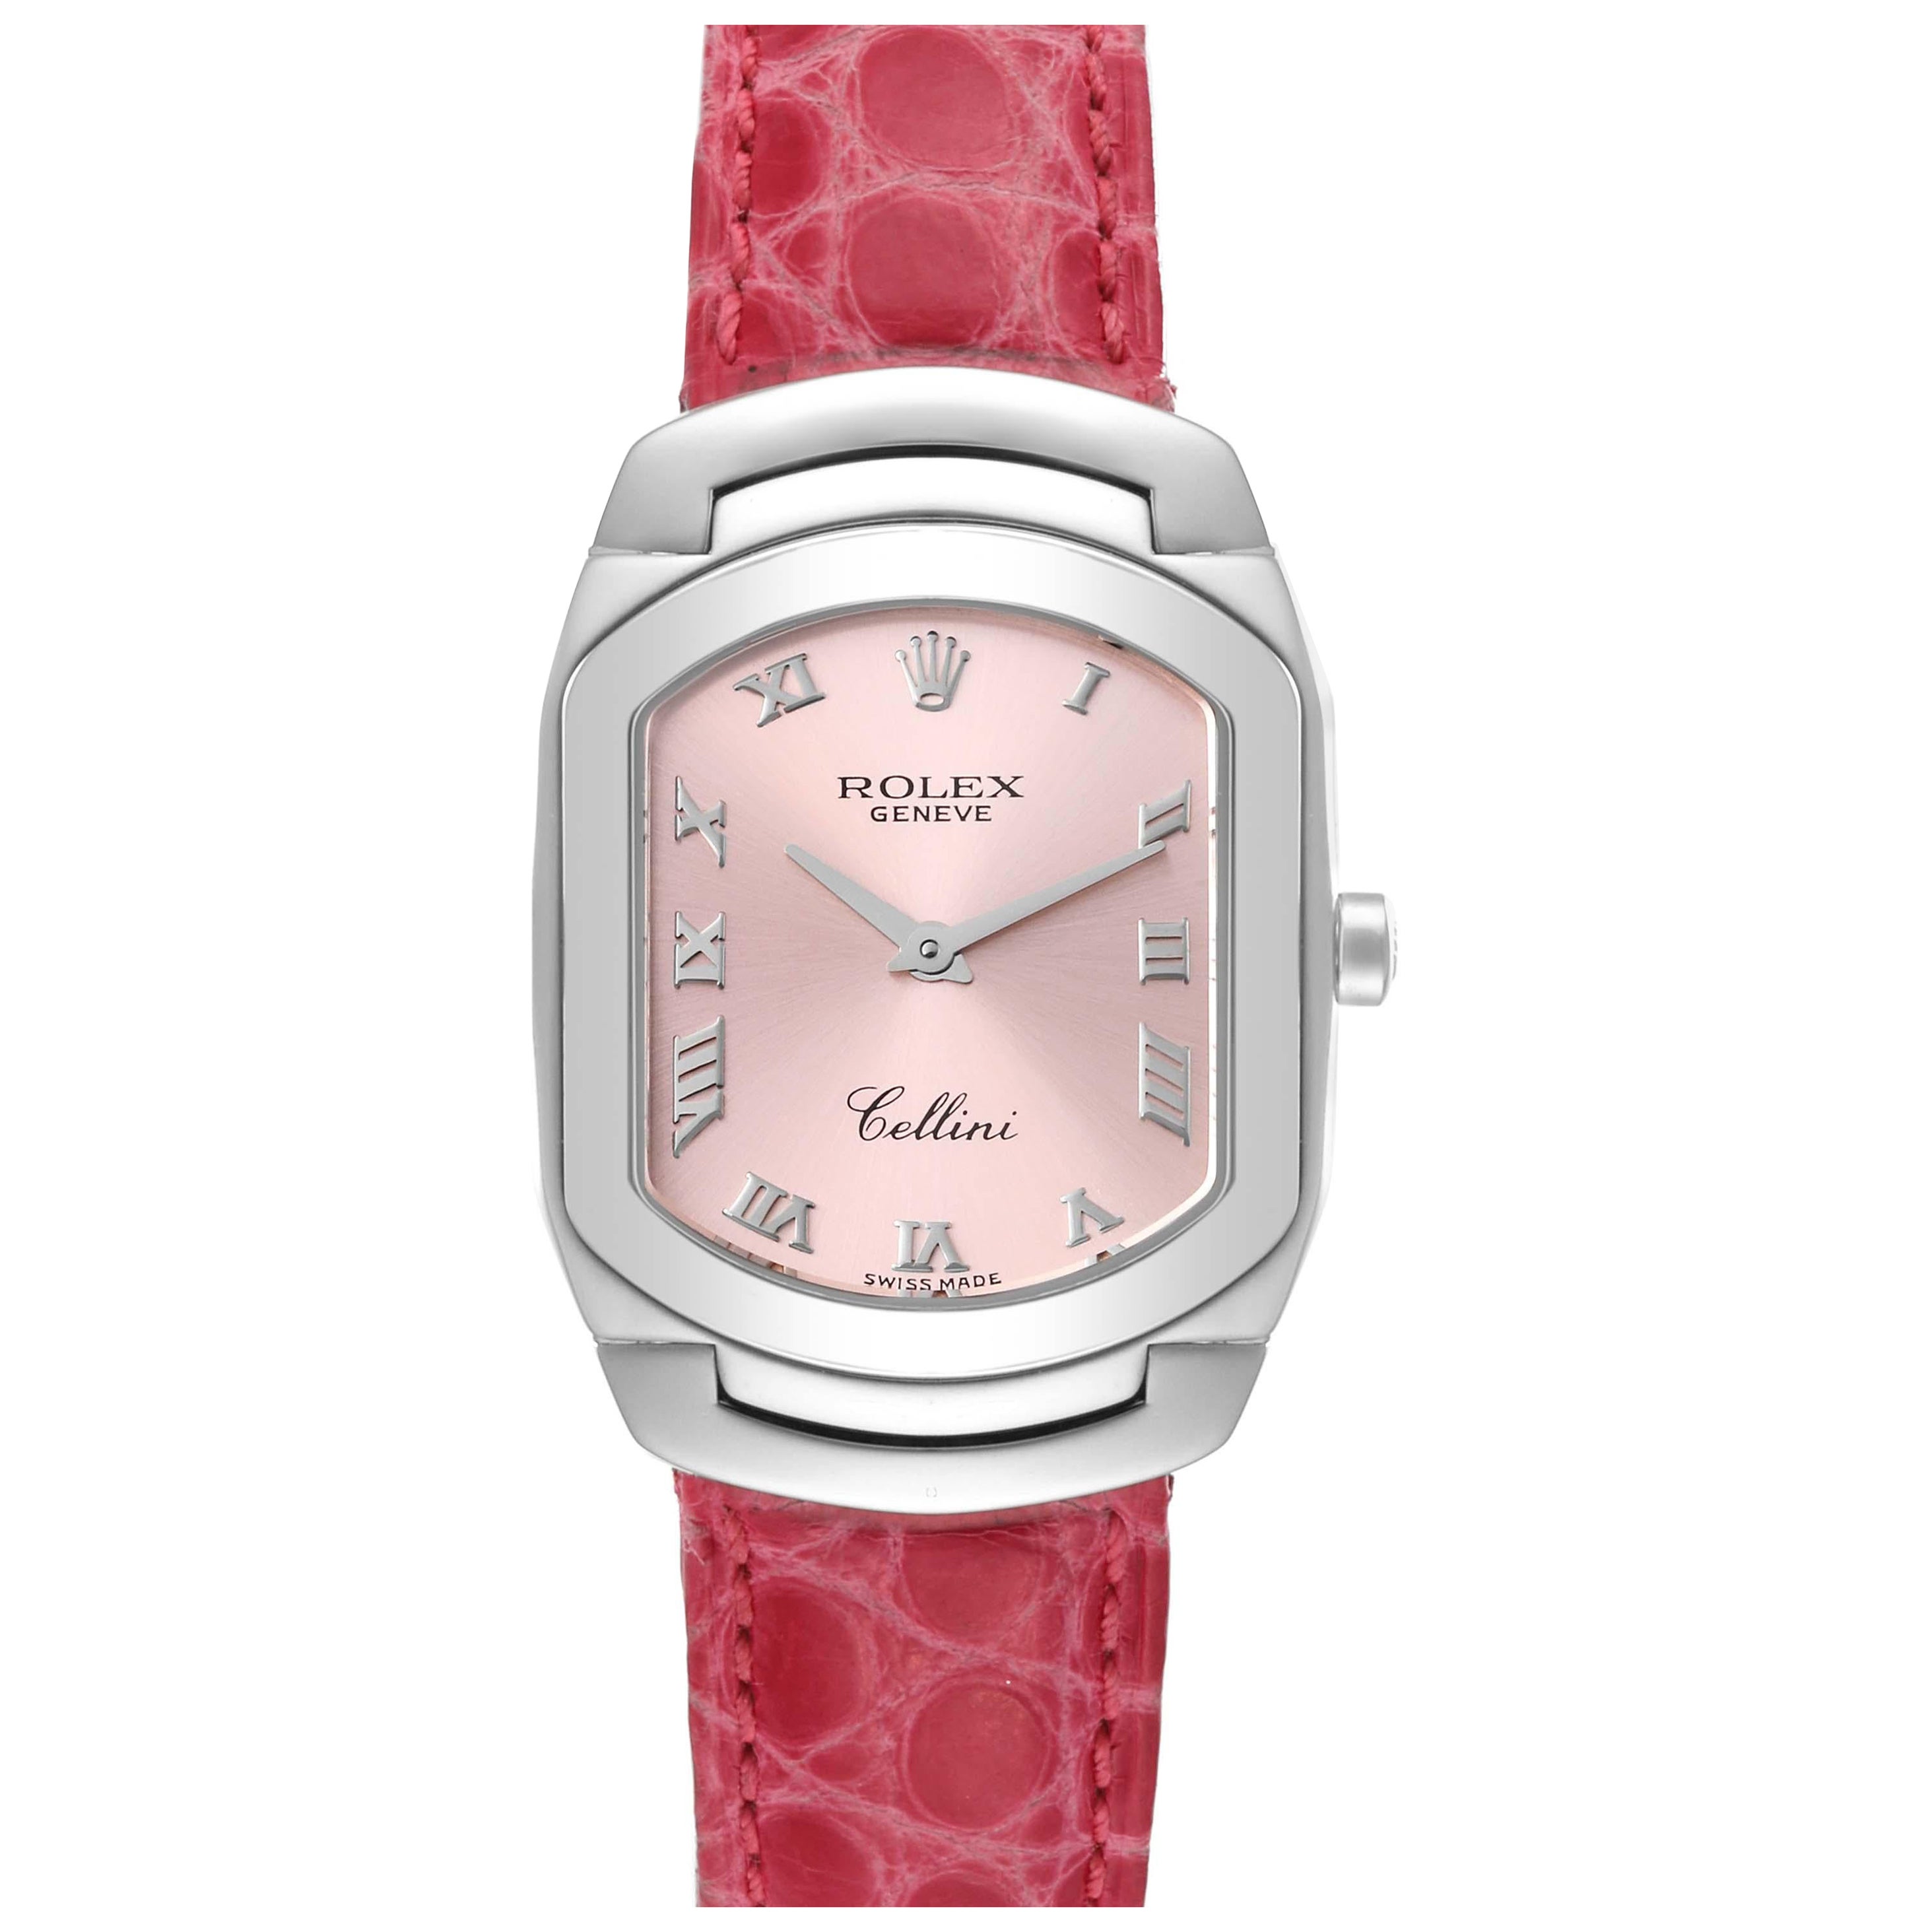 Rolex Cellini Cellissima White Gold Pink Dial Ladies Watch 6631 Papers